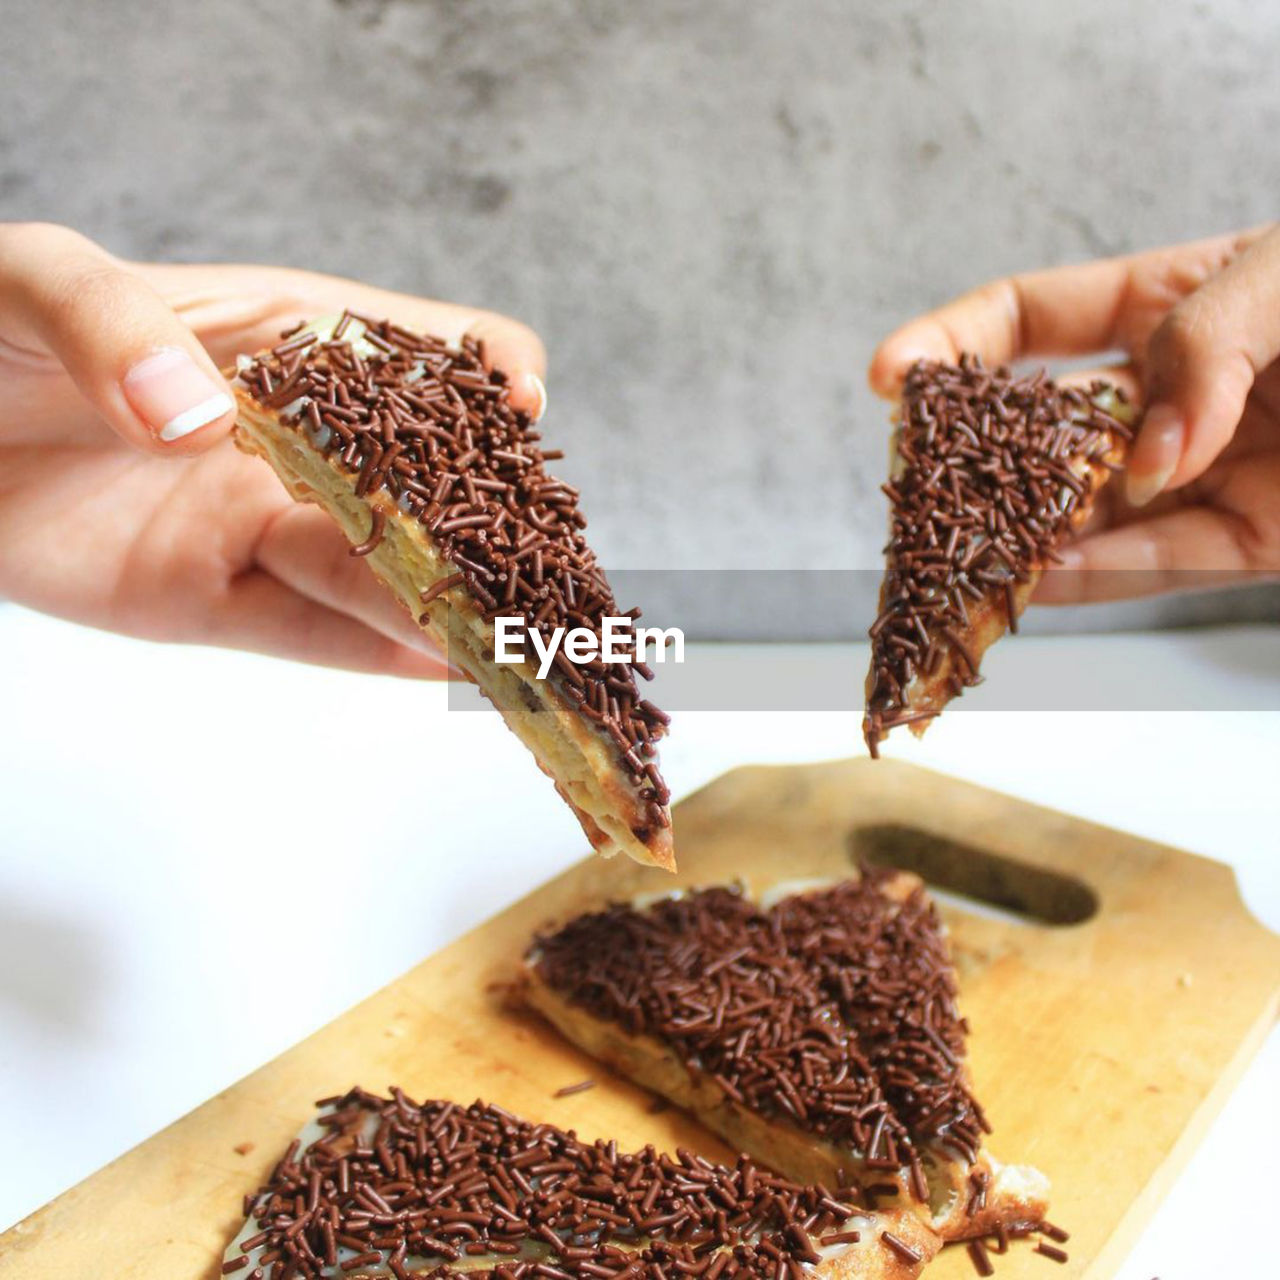 CROPPED IMAGE OF PERSON HOLDING CHOCOLATE CAKE